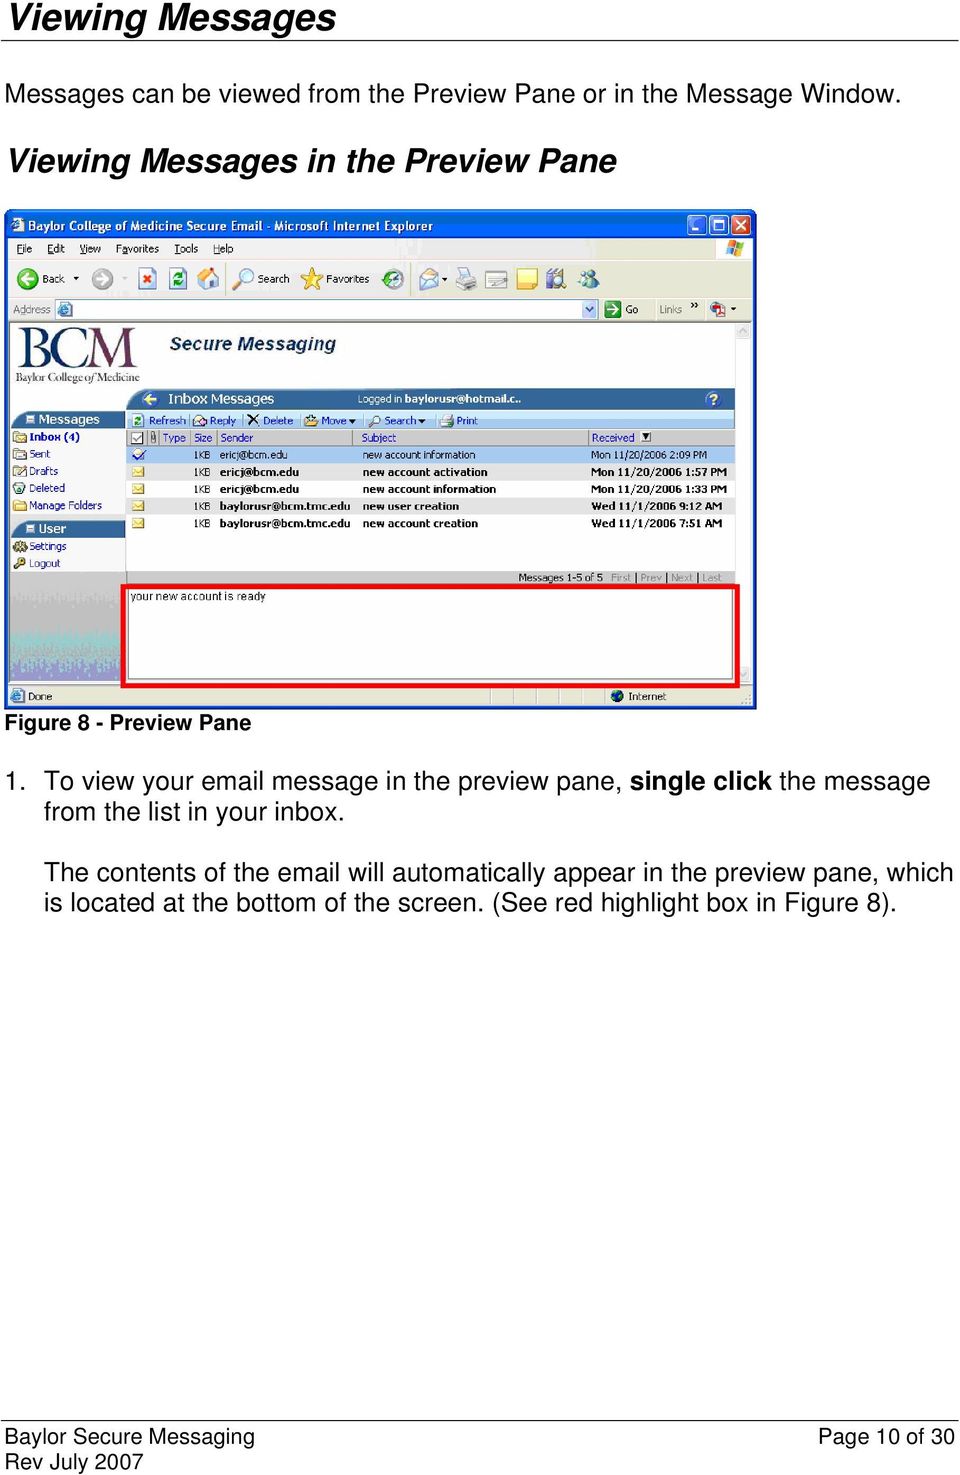 To view your email message in the preview pane, single click the message from the list in your inbox.